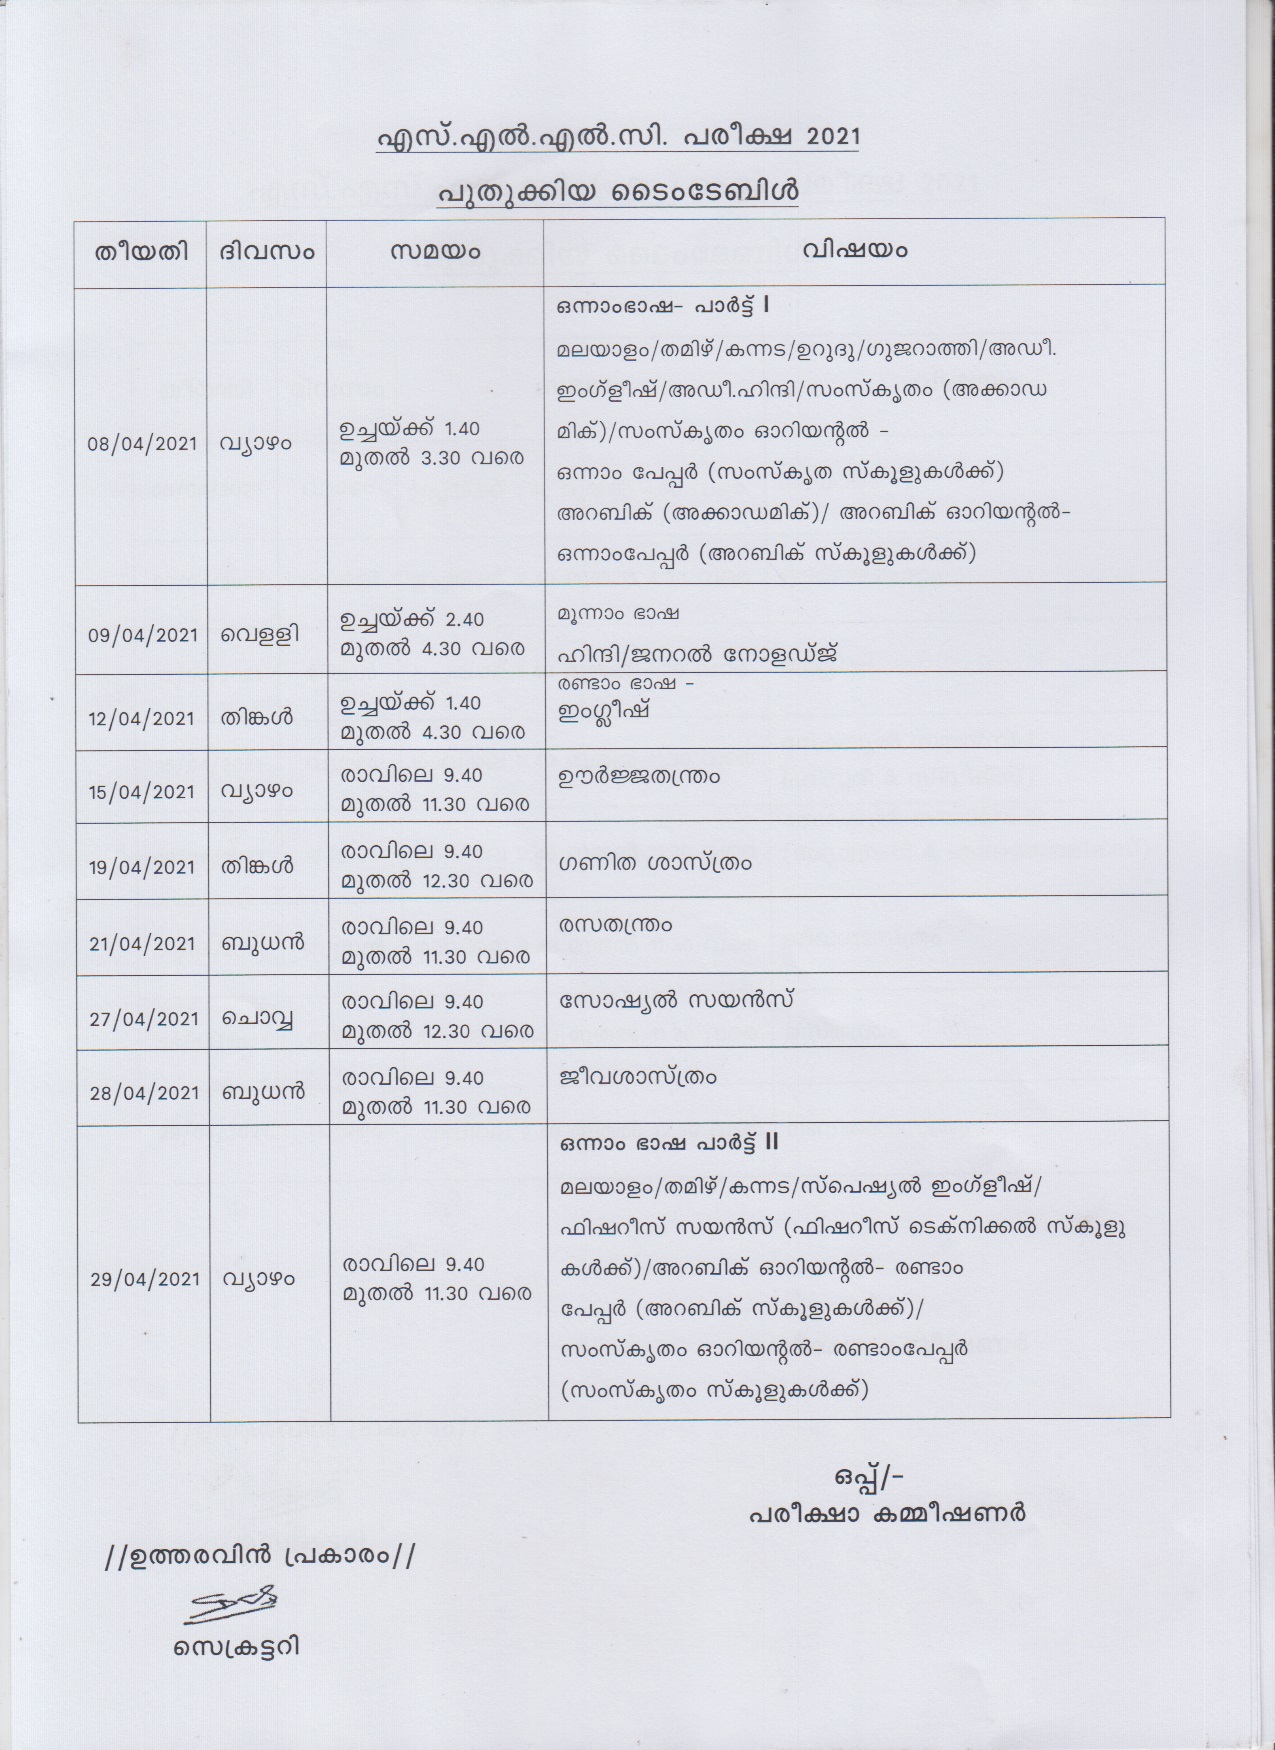 SSLC and THSLC March 2021 Revised Timetable - Notification Image 1